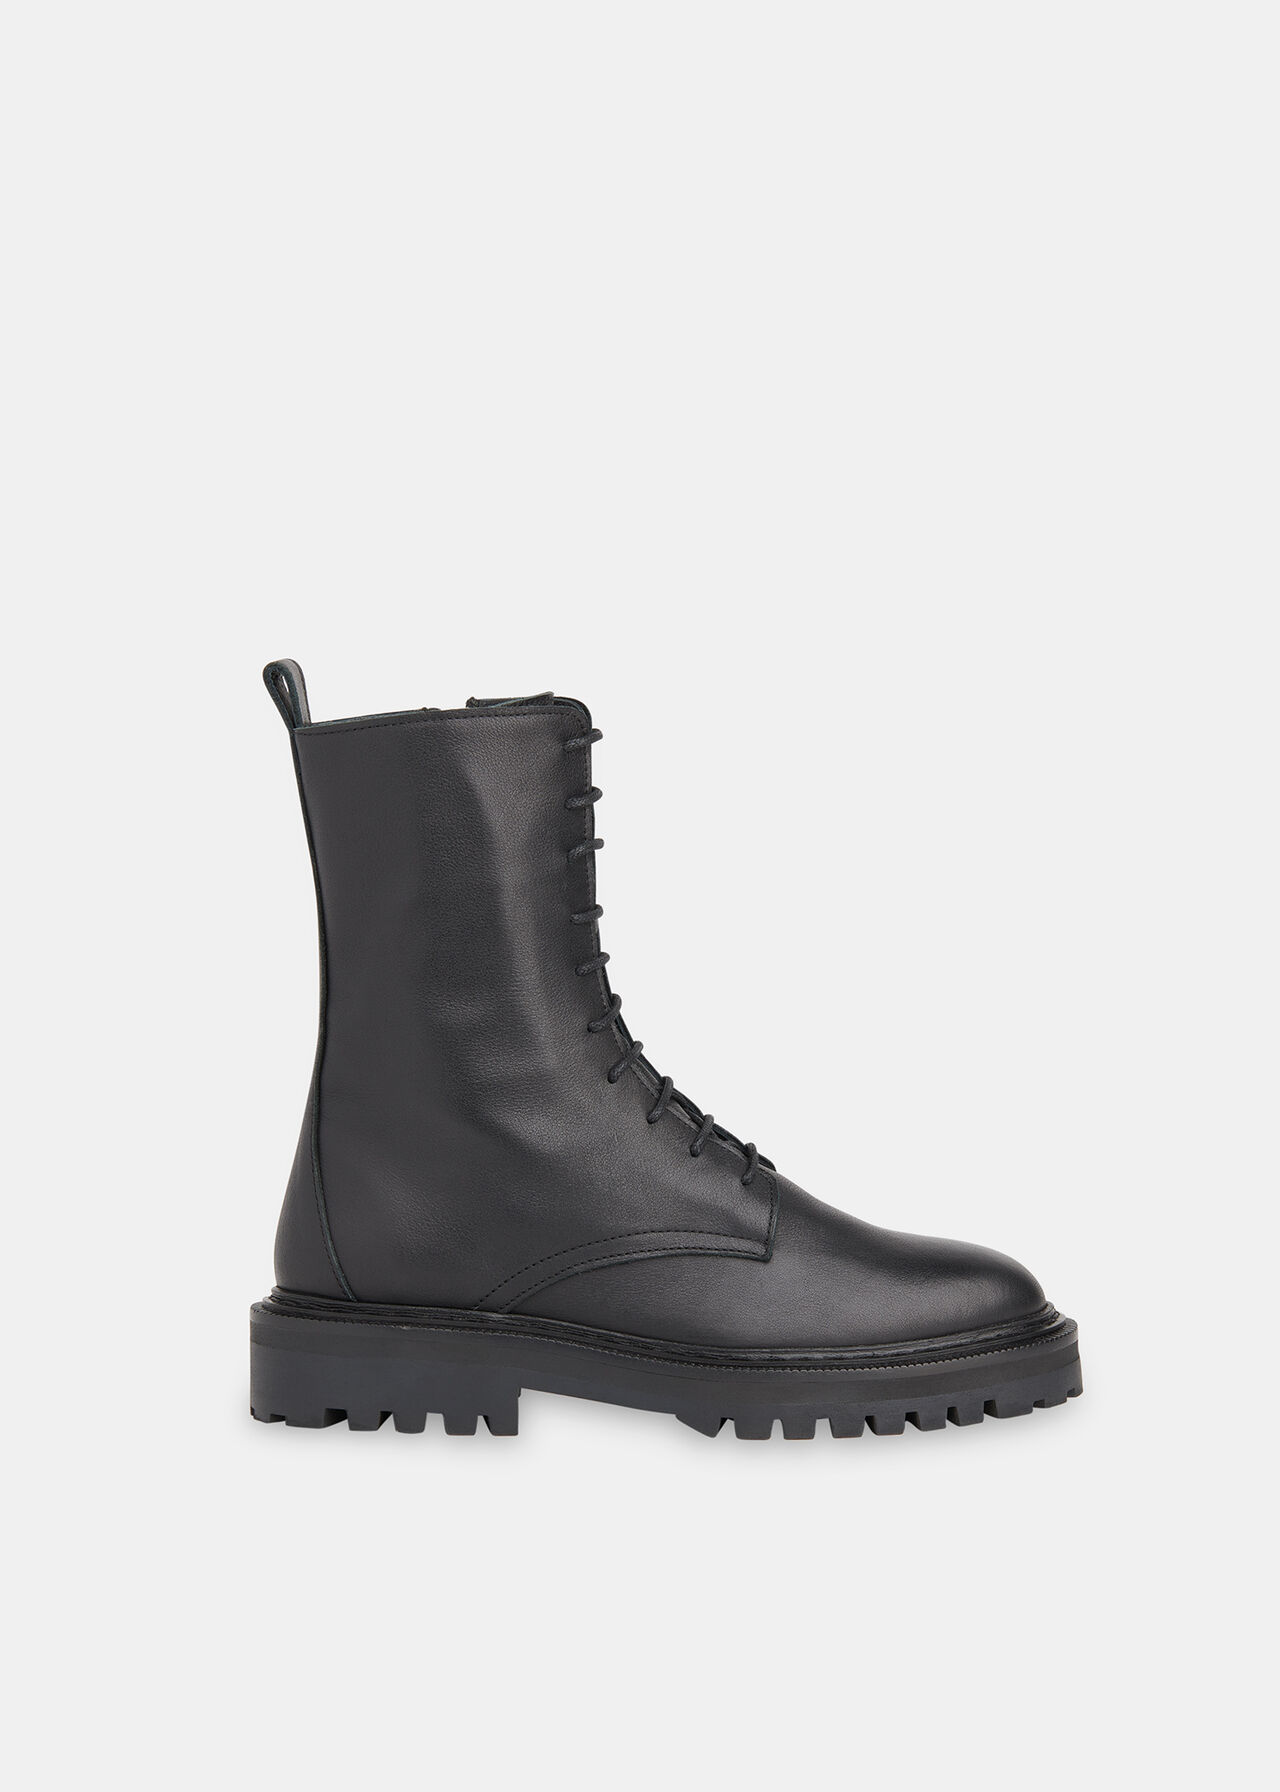 Black Piper Lace Up Boot | WHISTLES | Whistles UK